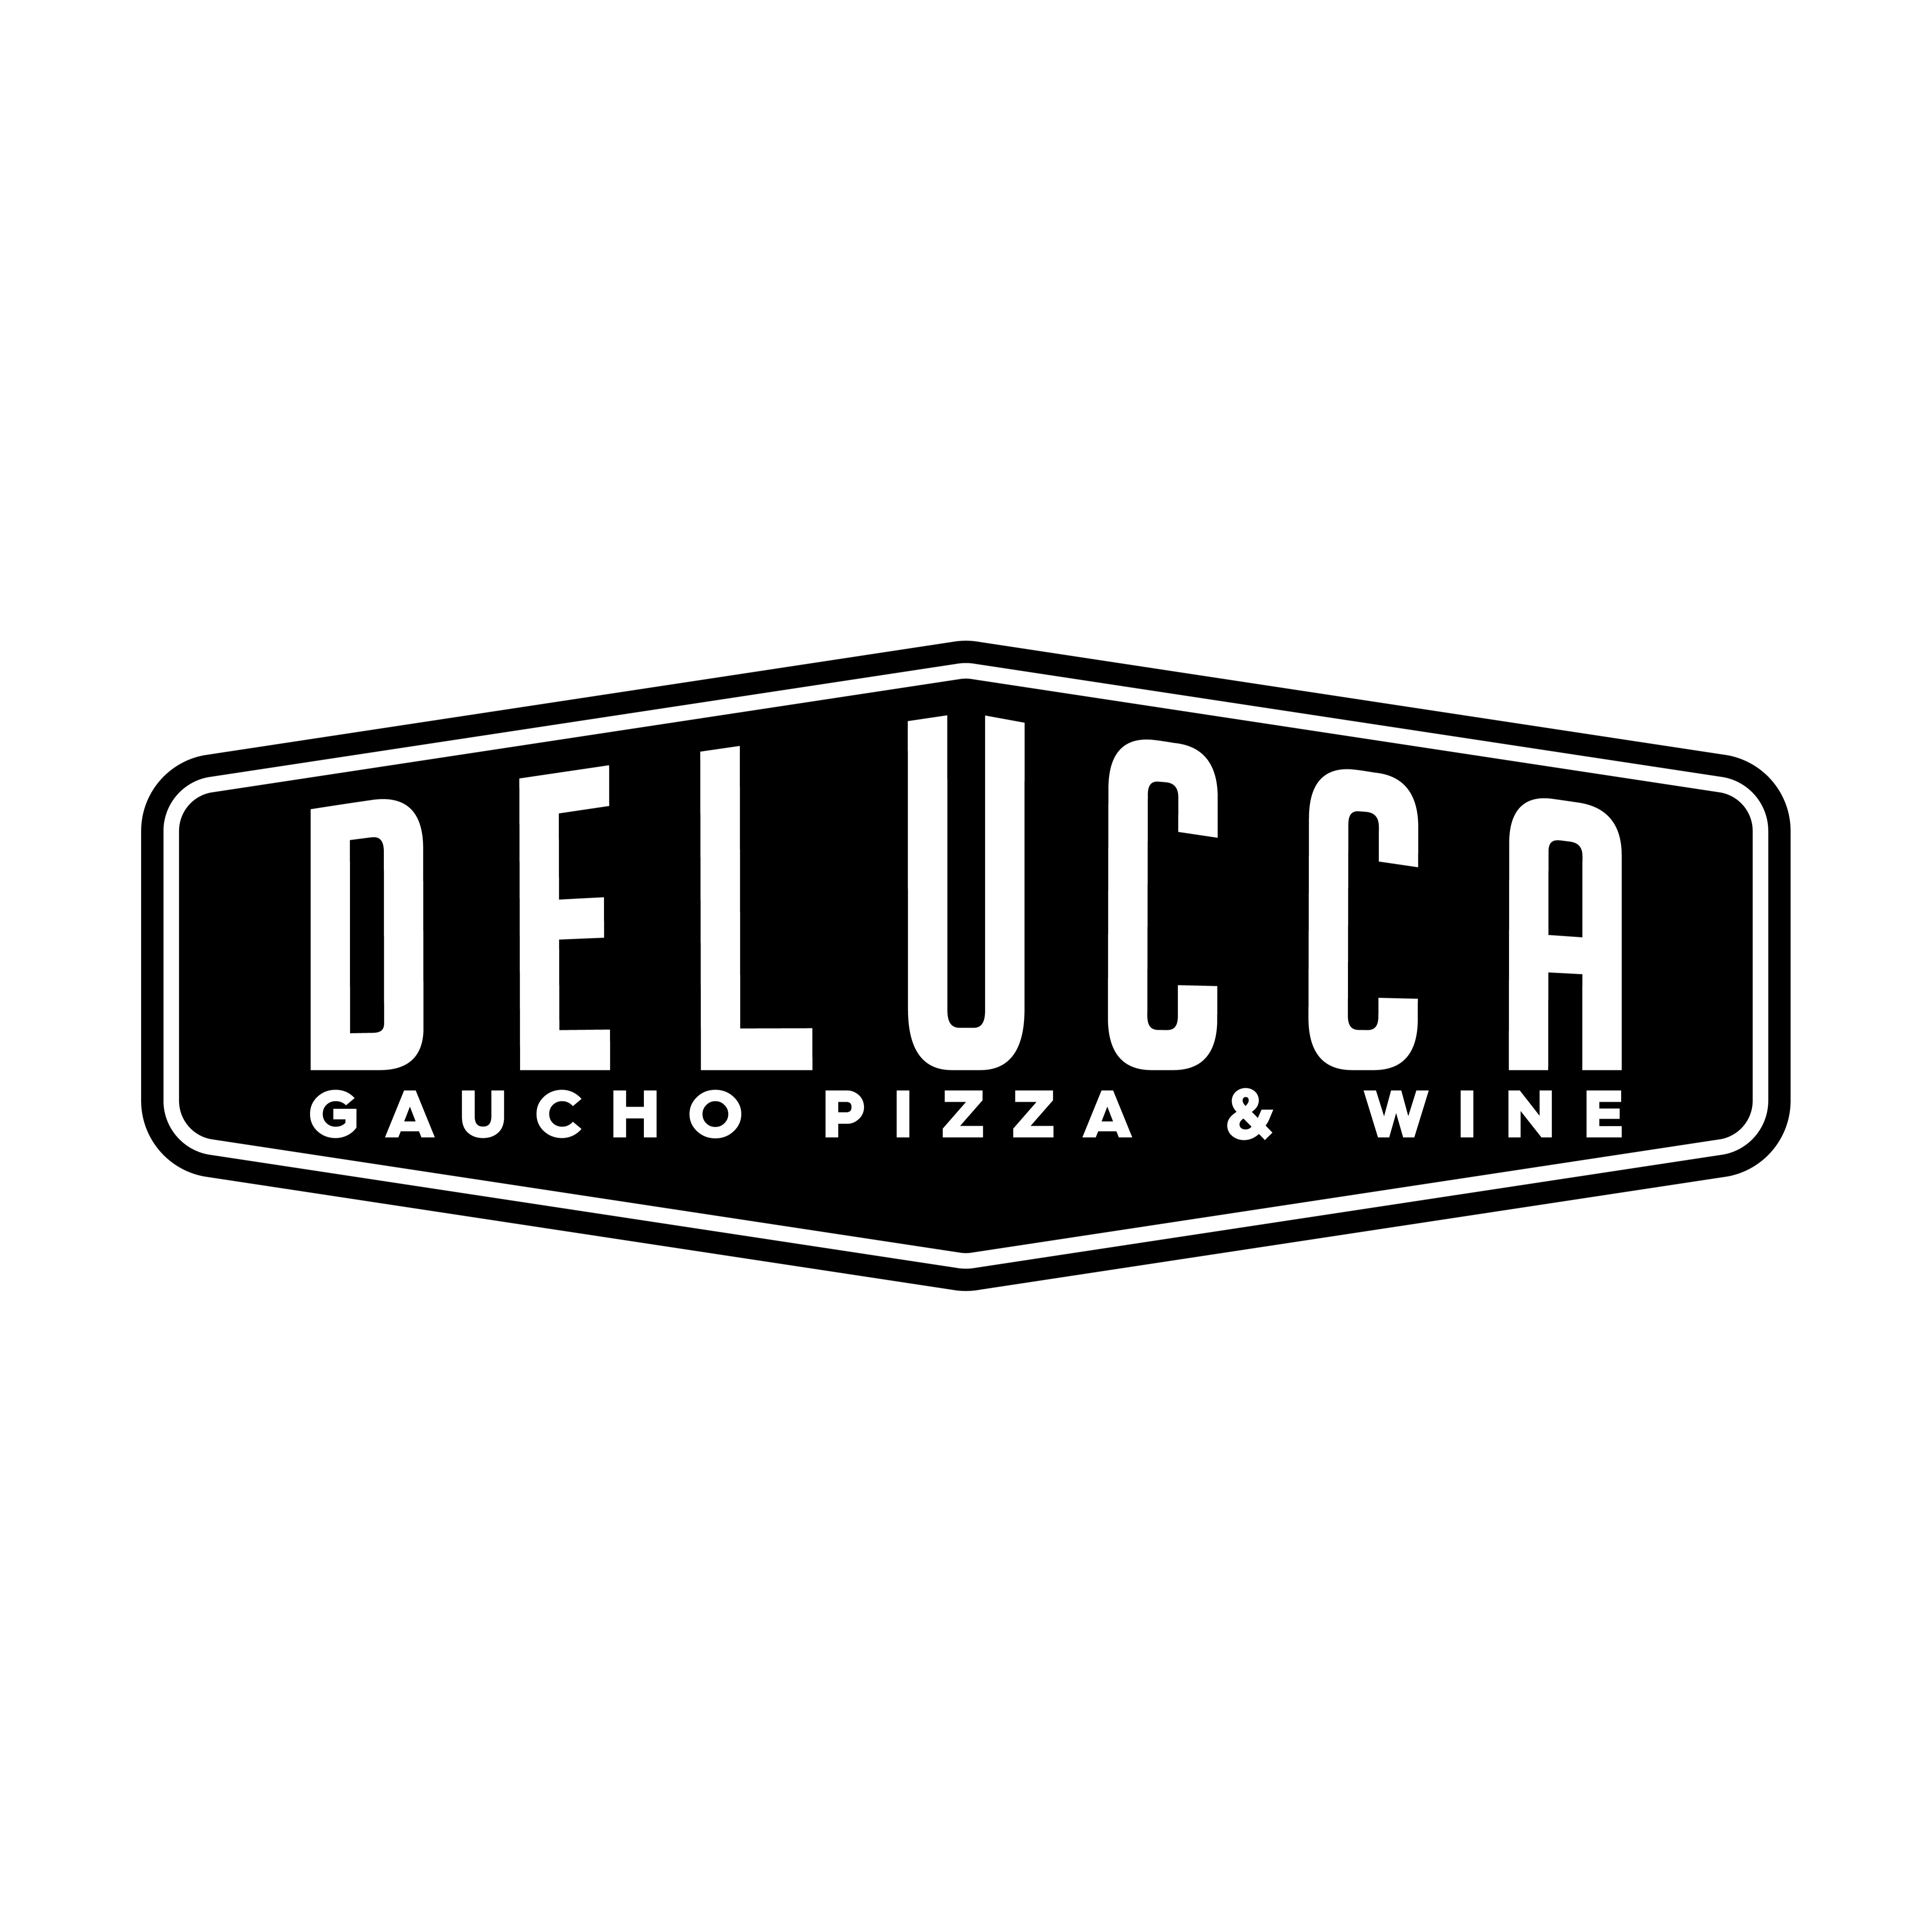 Delucca Gaucho Pizza & Wine Fort Worth - Alliance Town Center - Fort Worth, TX 76177 - (682)235-9284 | ShowMeLocal.com